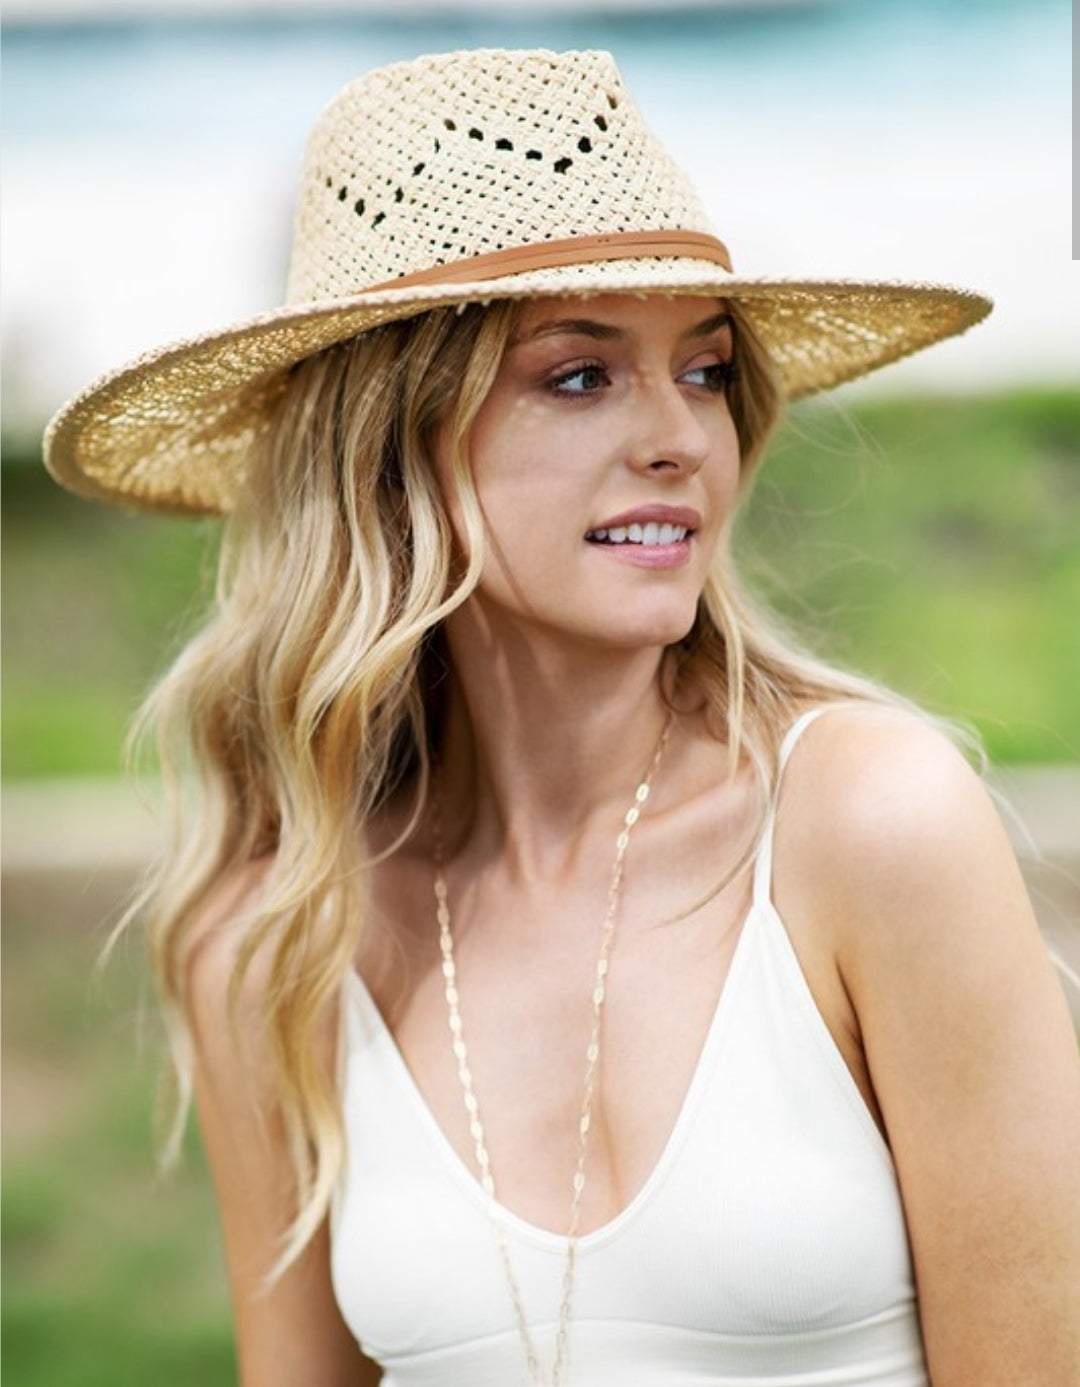 Cream panama hat with faux leather band